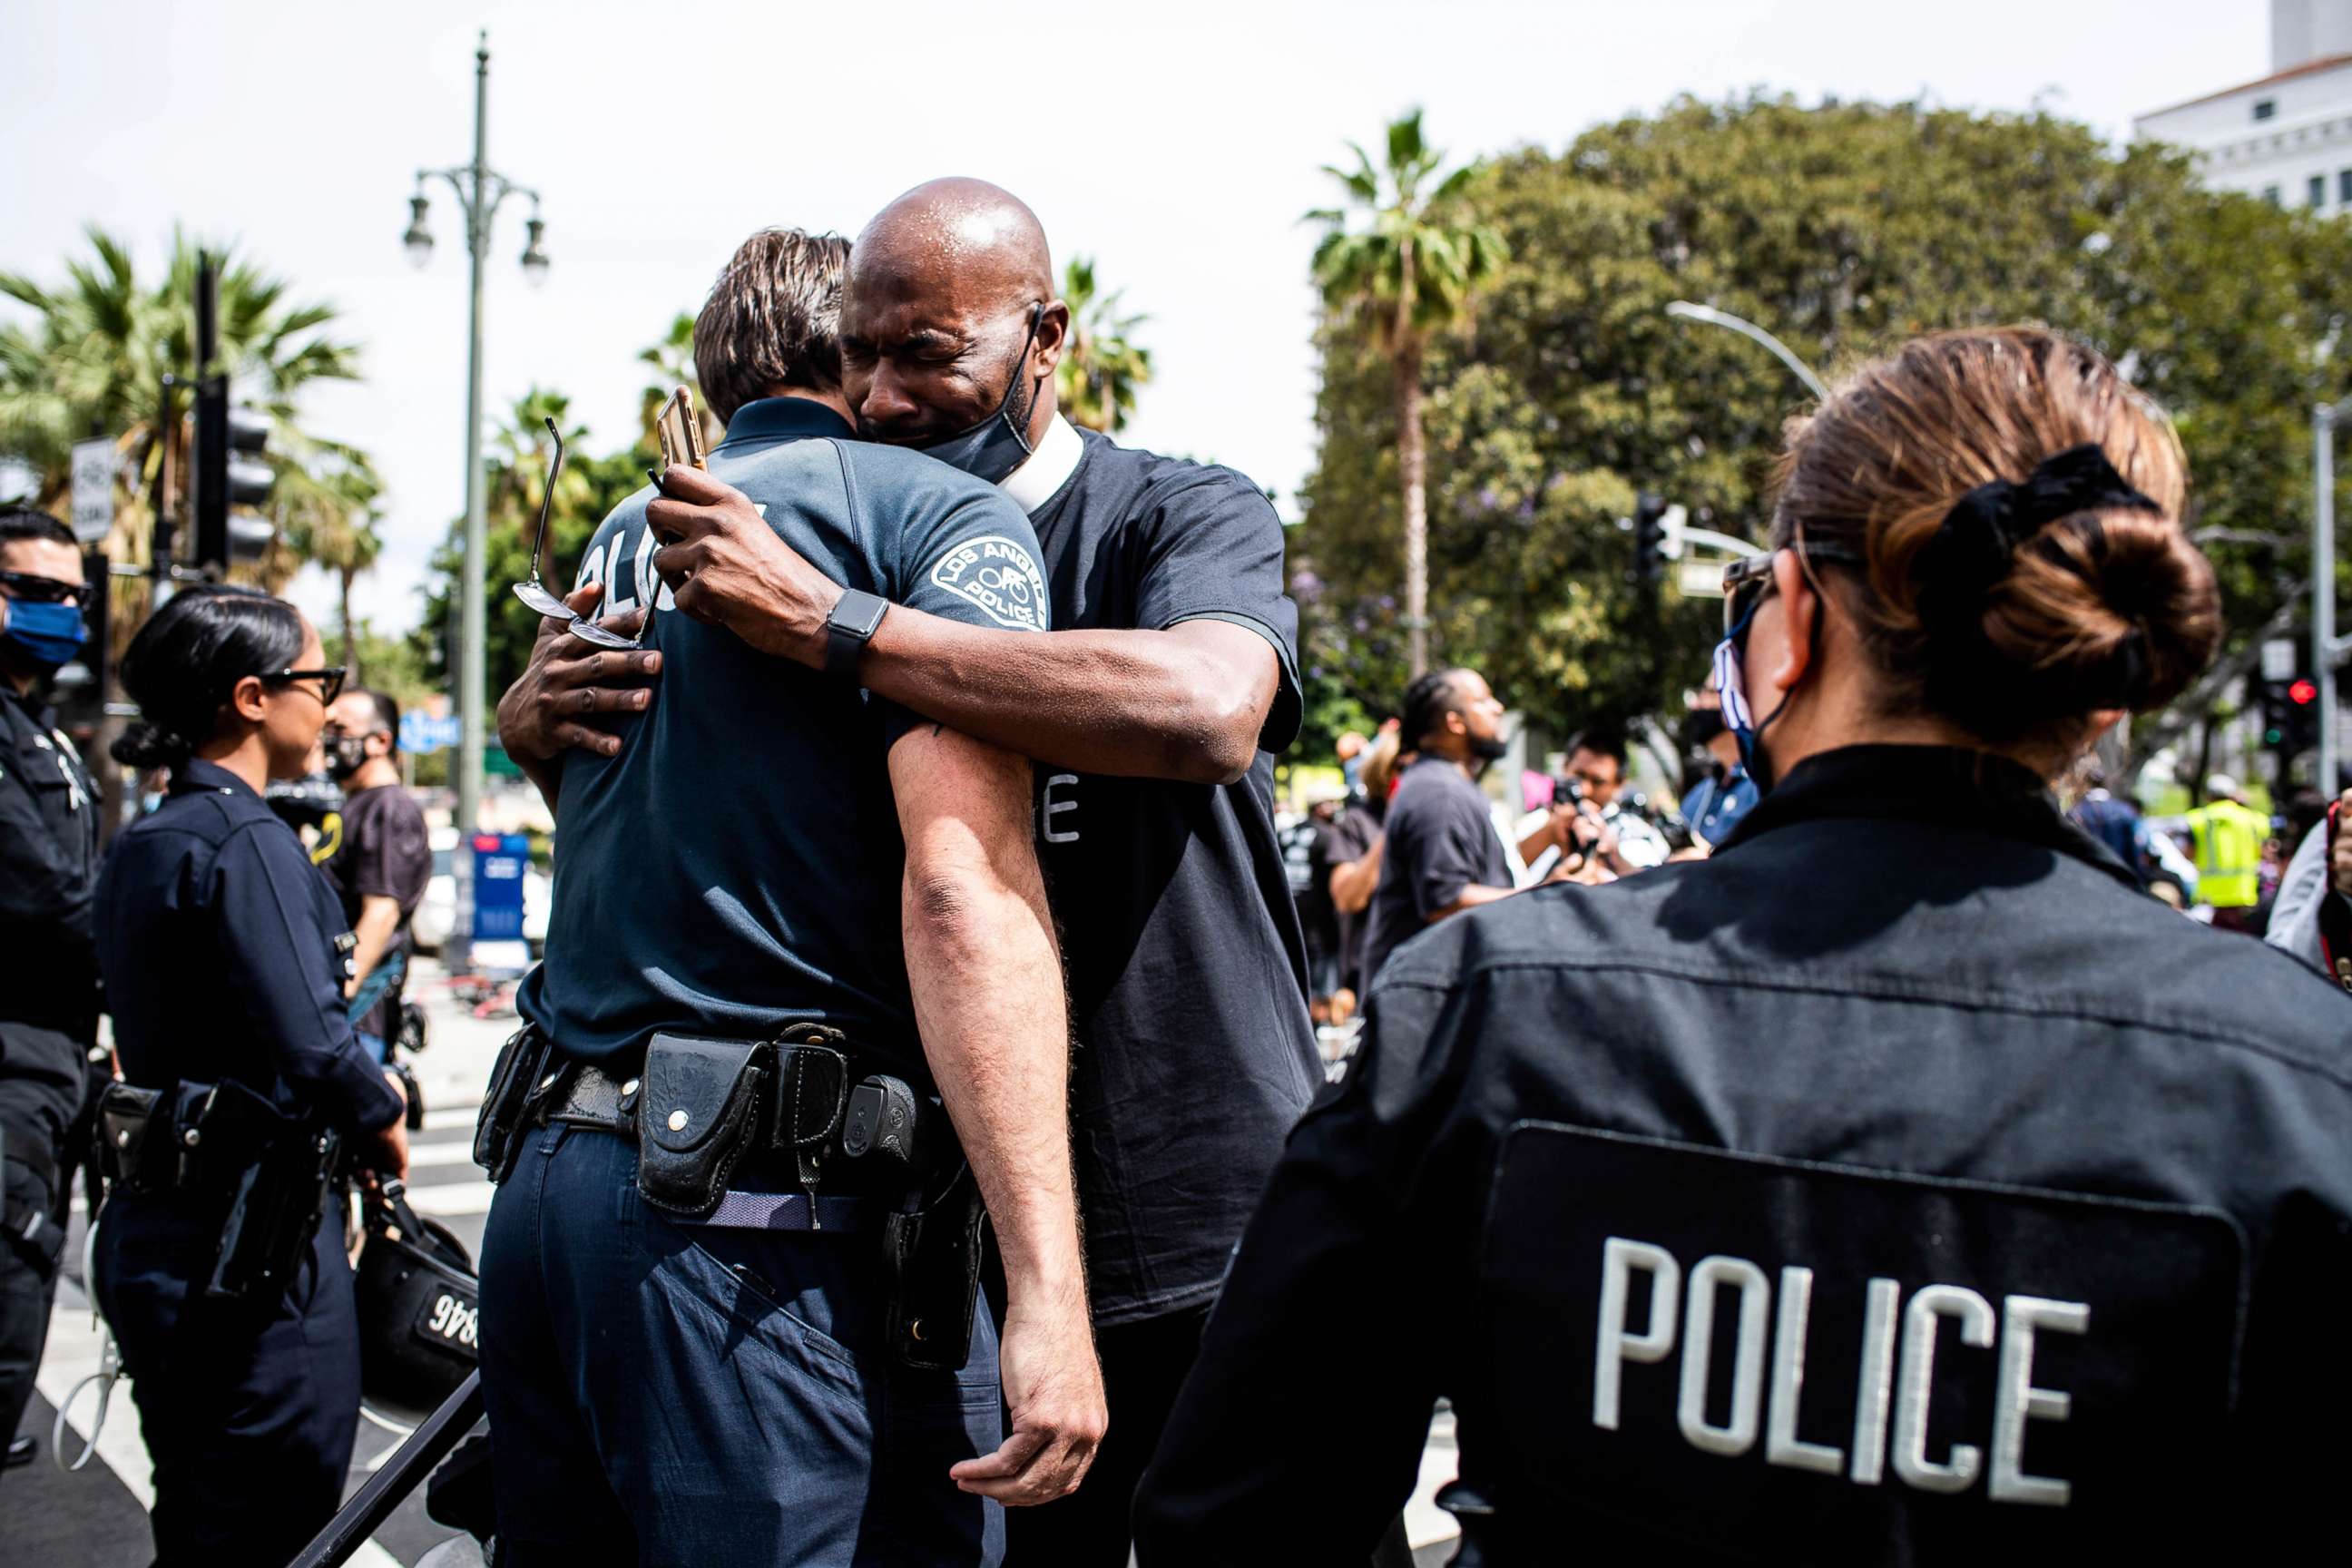 PHOTO: Pastor Calvin Sparks, of Life Pavilion in Carson, hugs LAPD officers after some officers took a knee with clergy and marchers at LAPD Headquarters during a demonstration demanding justice for George Floyd, June 2, 2020 in Los Angeles.